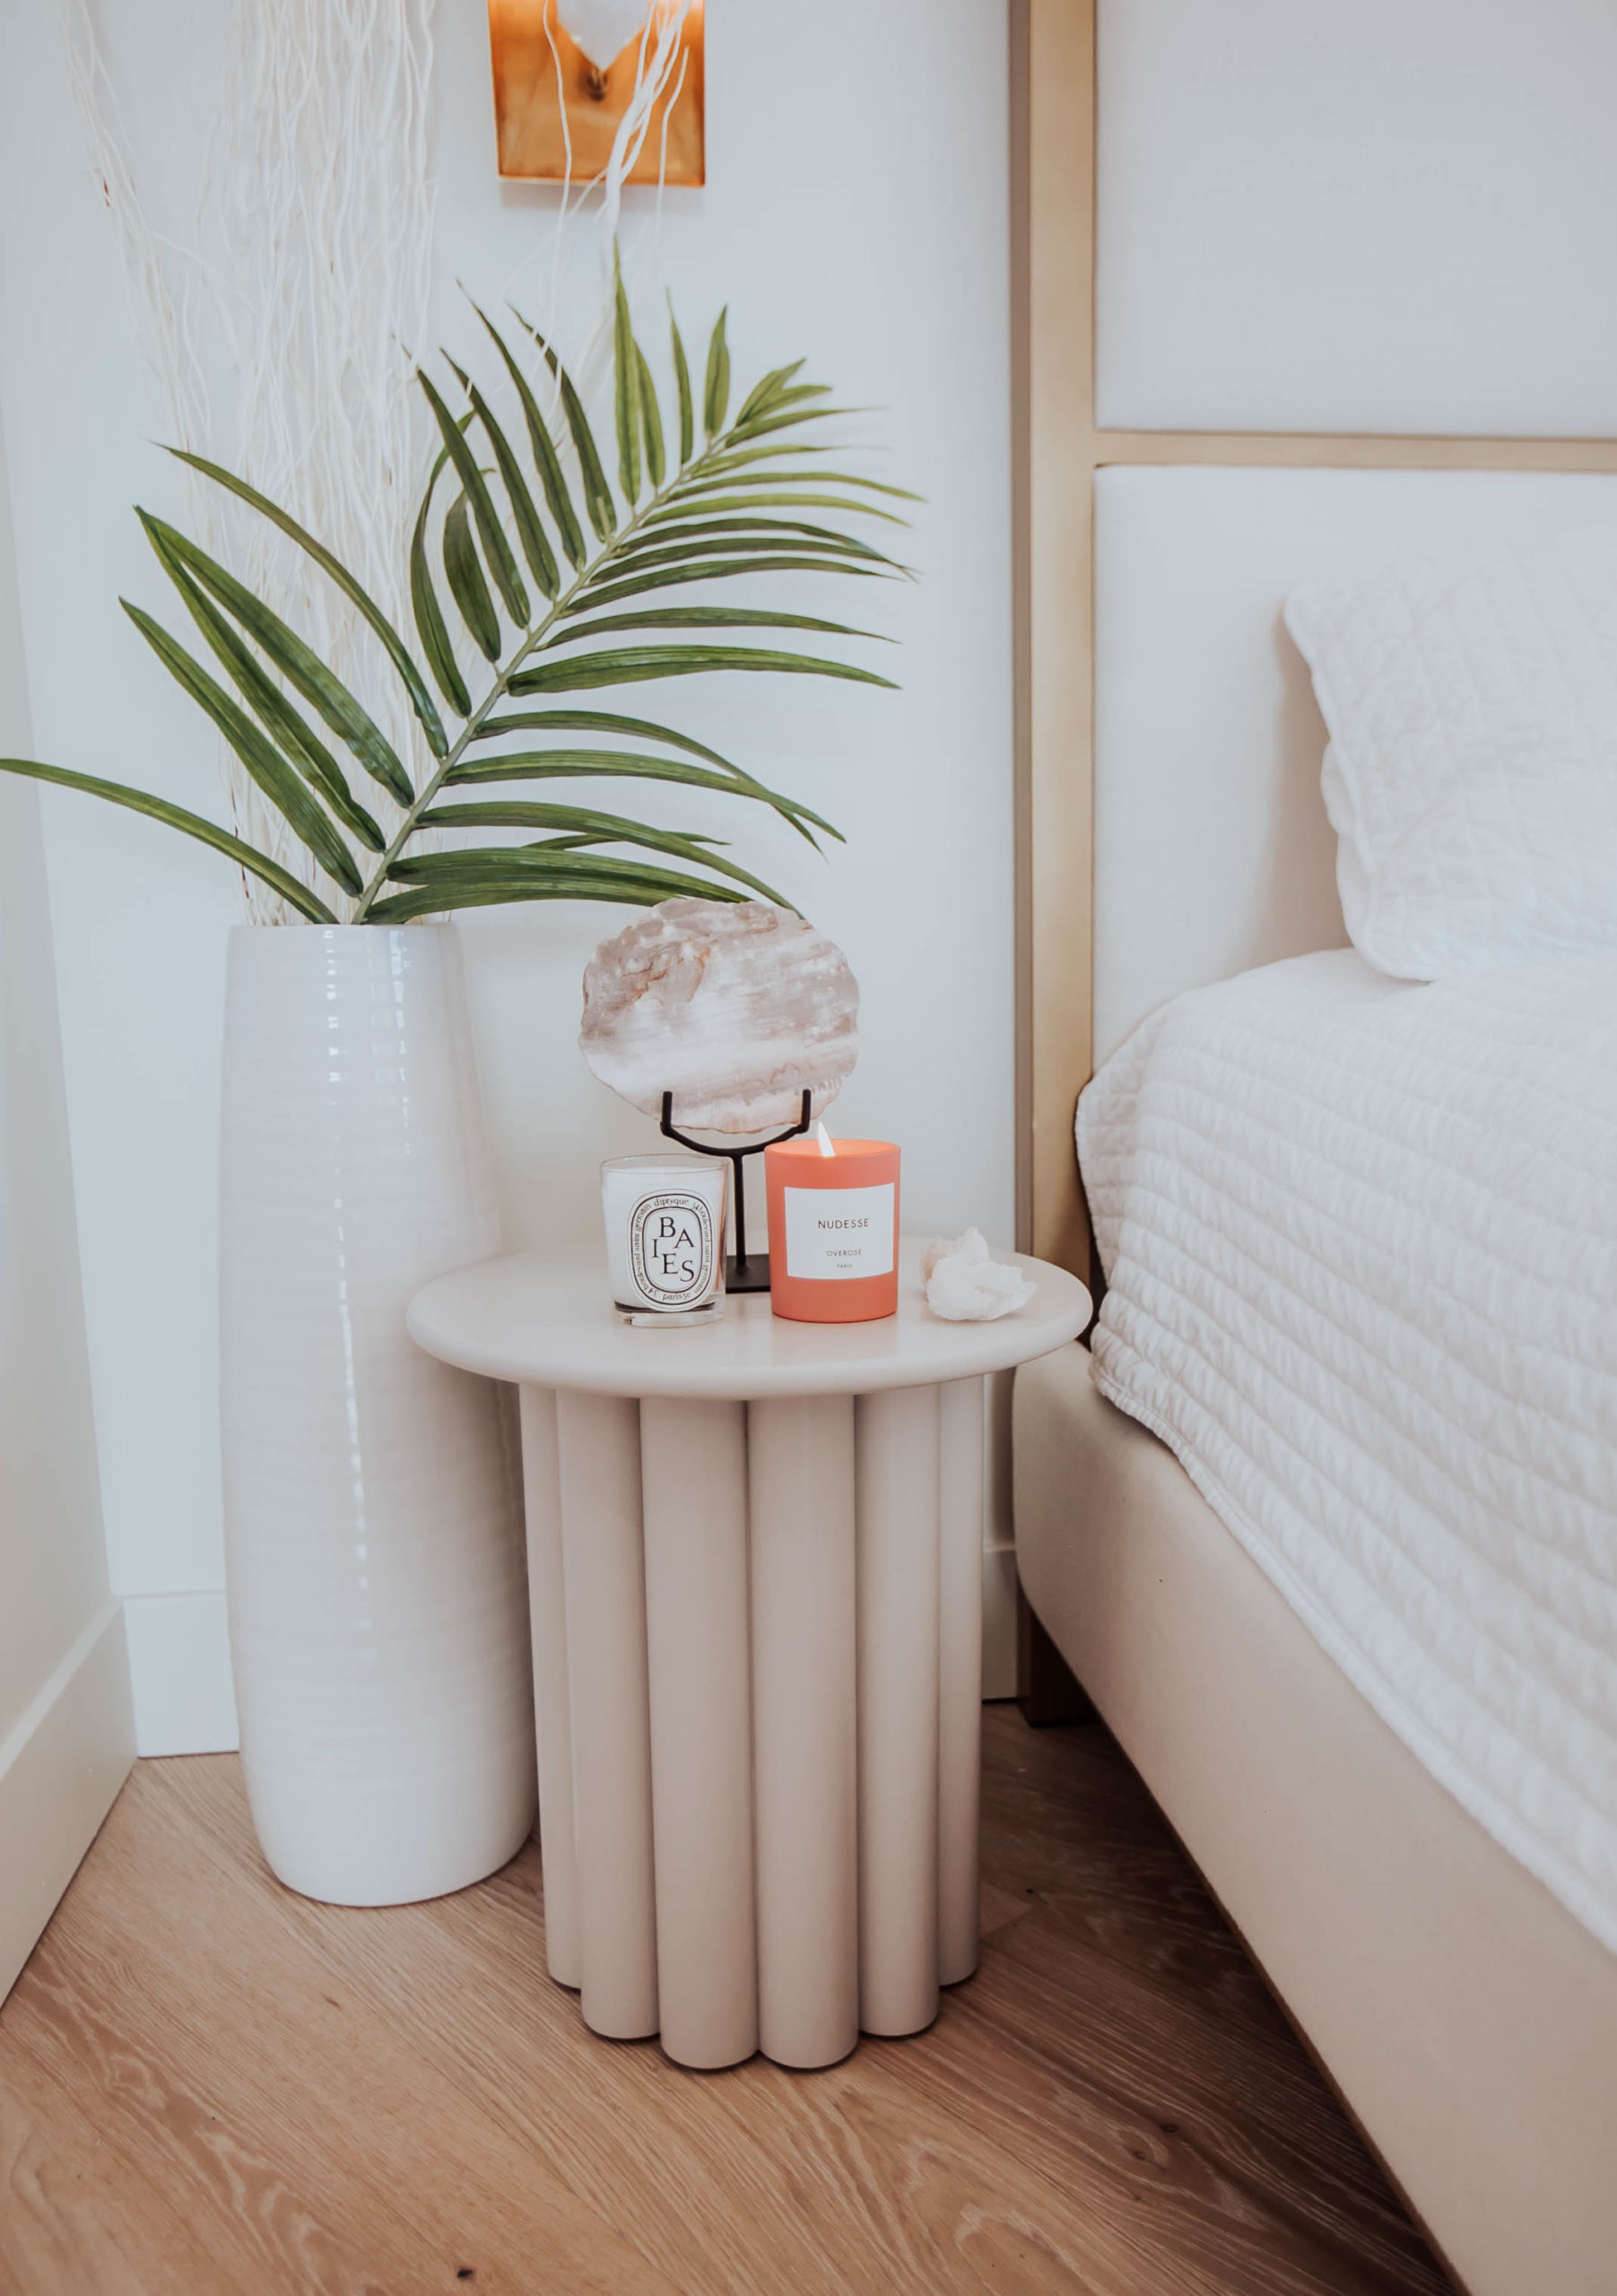 Reno bloggers, Ashley Zeal & Emily Weiczorek partner with Nordstrom to share their favorite home fragrance. They are featuring their favorite candles, room spray & soap!